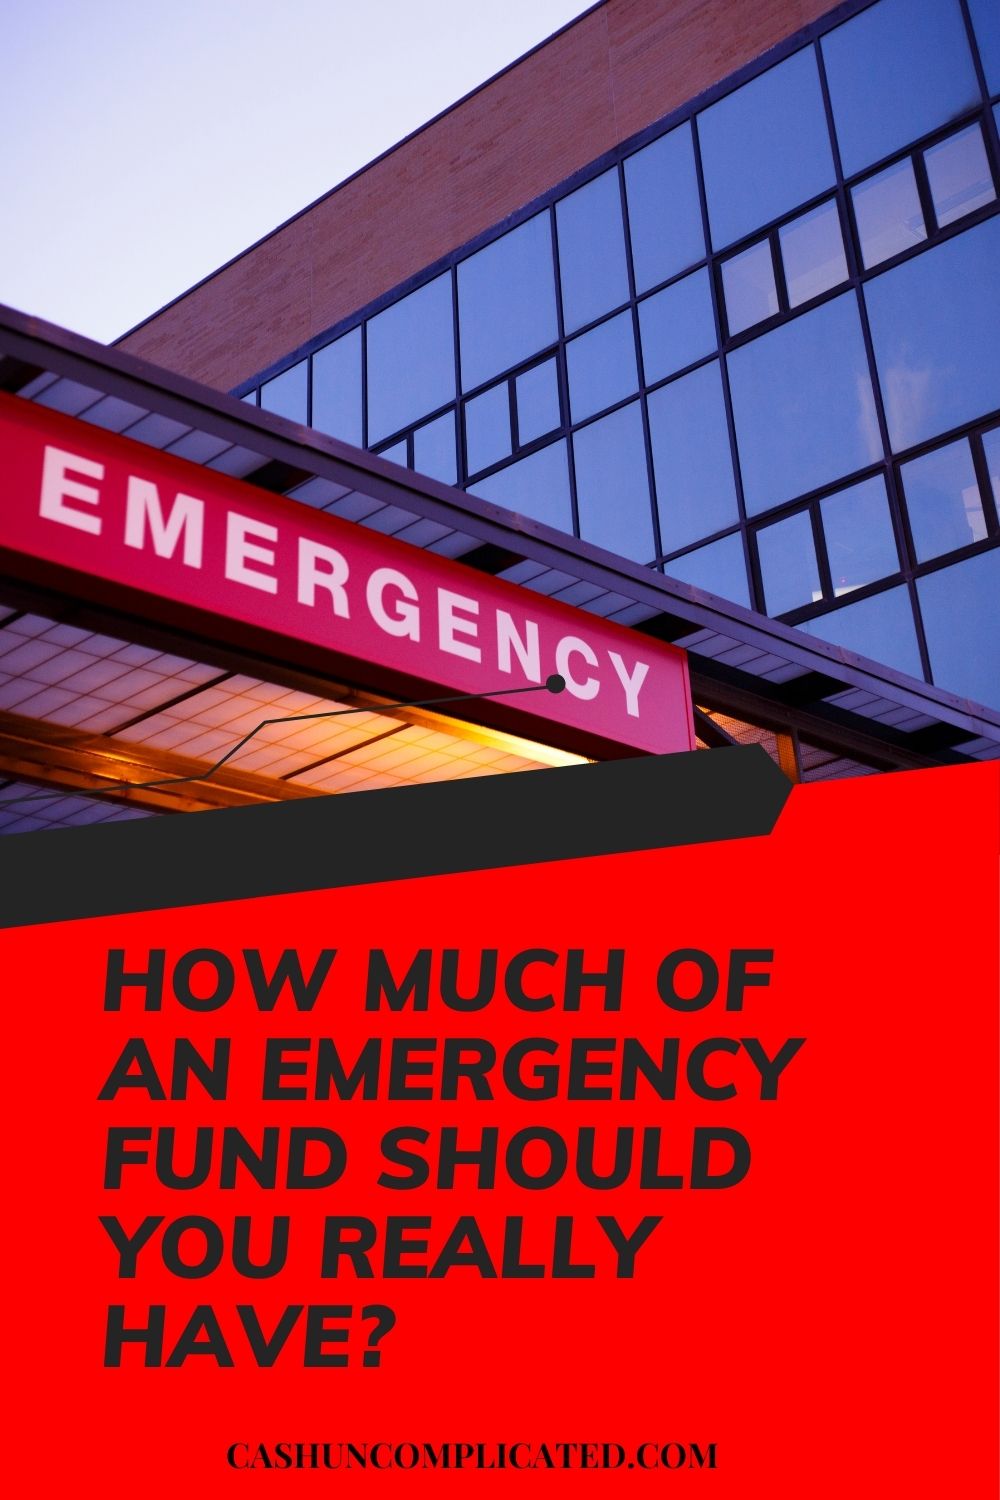 how-much-of-an-emergency-fund-should-you-really-have-cash-uncomplicated